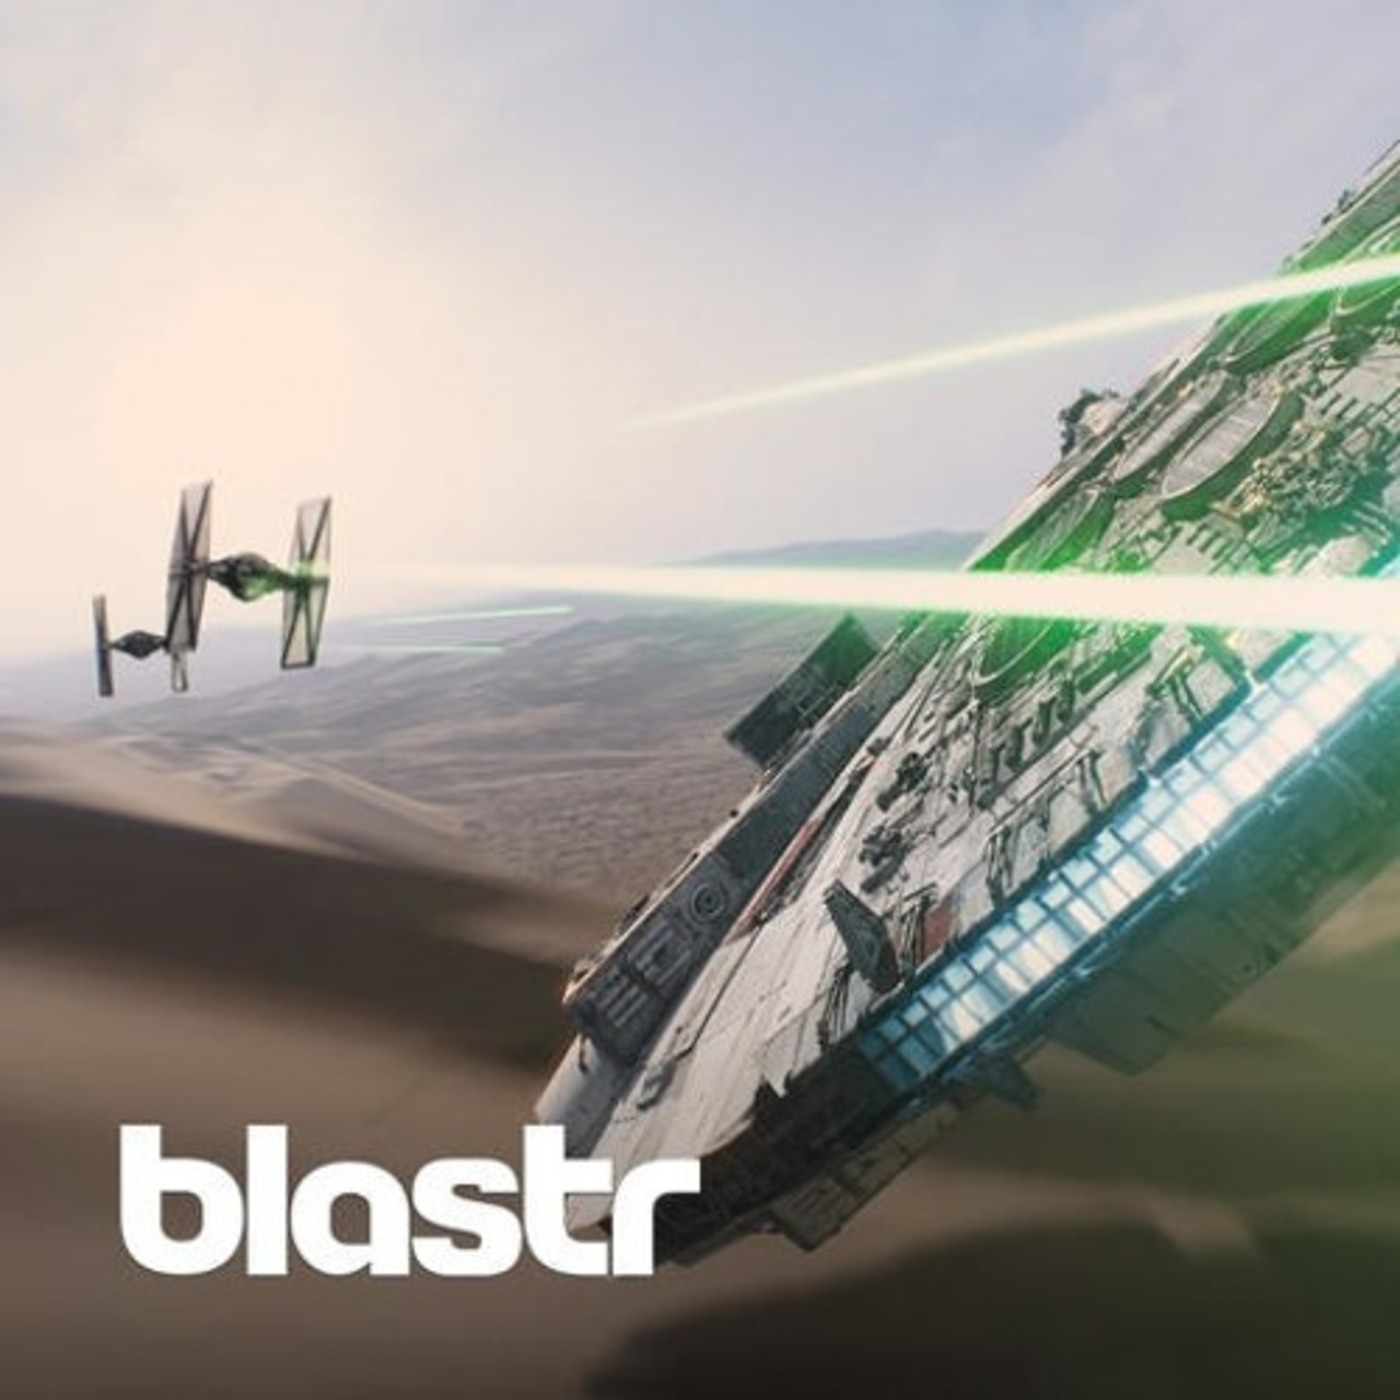 Who Won the Week Episode 6: Star Wars: The Force Awakens (Spoiler Free) by Blastr